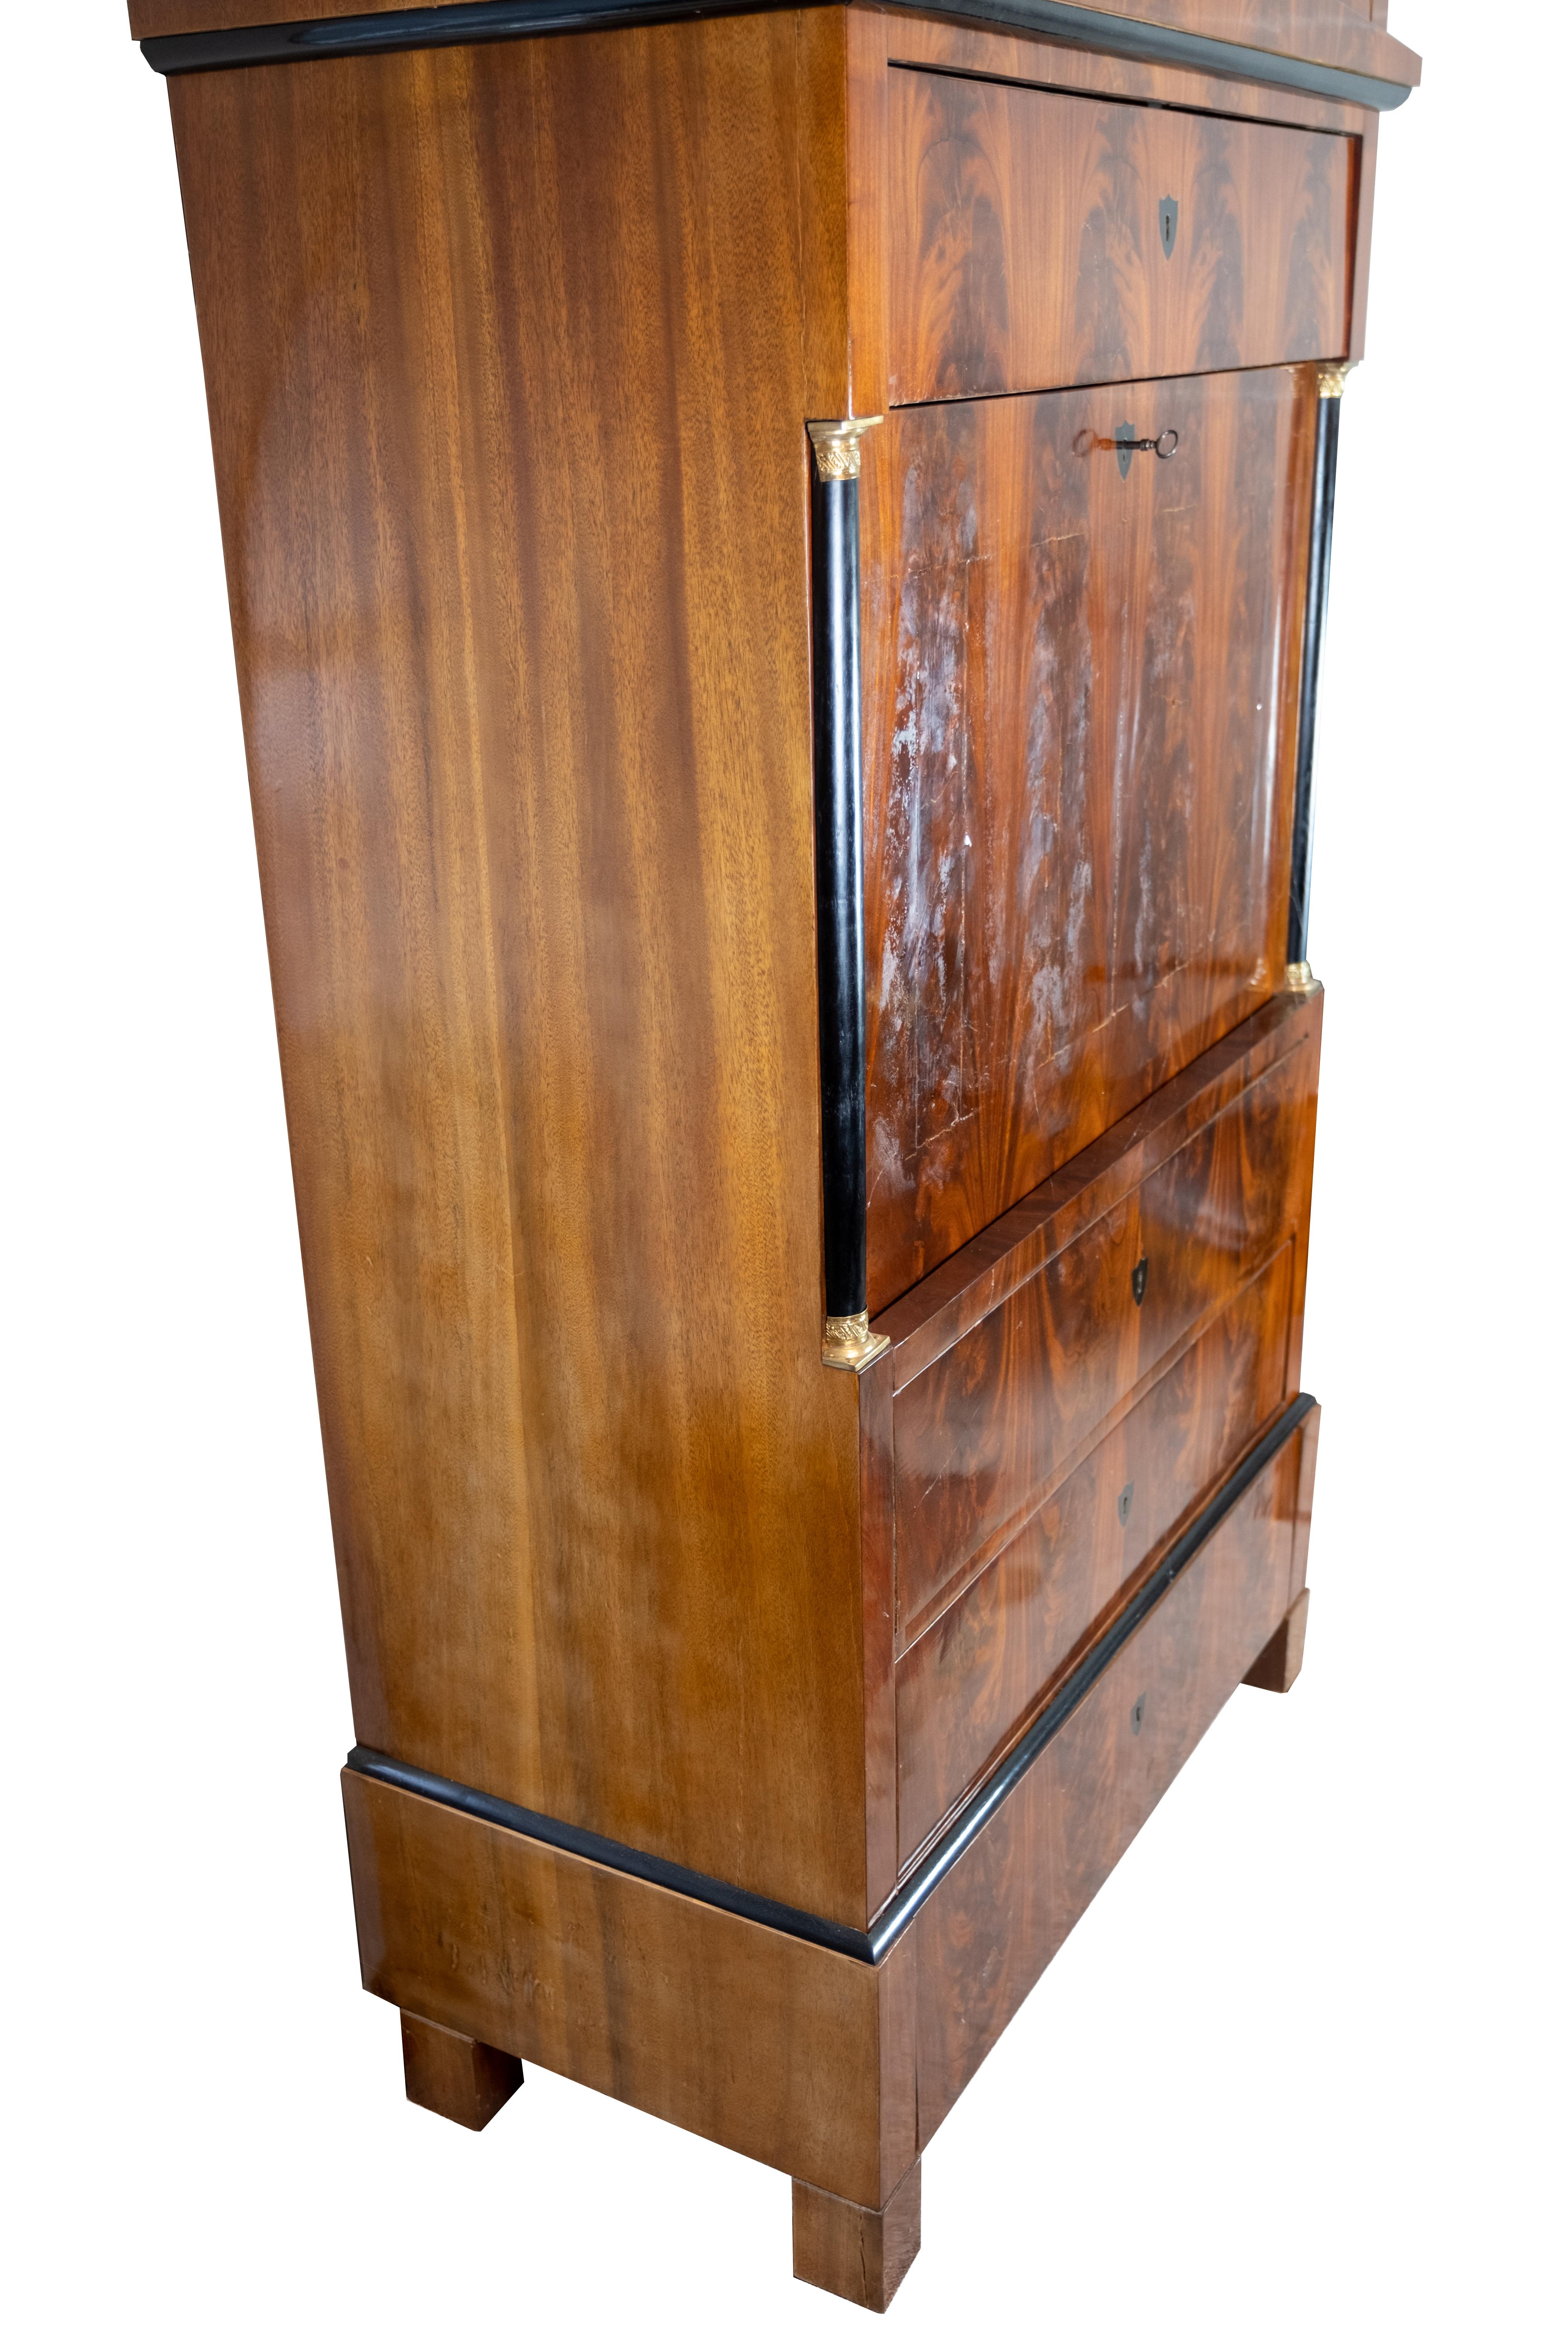 Late Empire cabinet of handpolished mahogany and of cherry on the inside, from Denmark around the 1840s. The cabinet is in great antique condition.

 